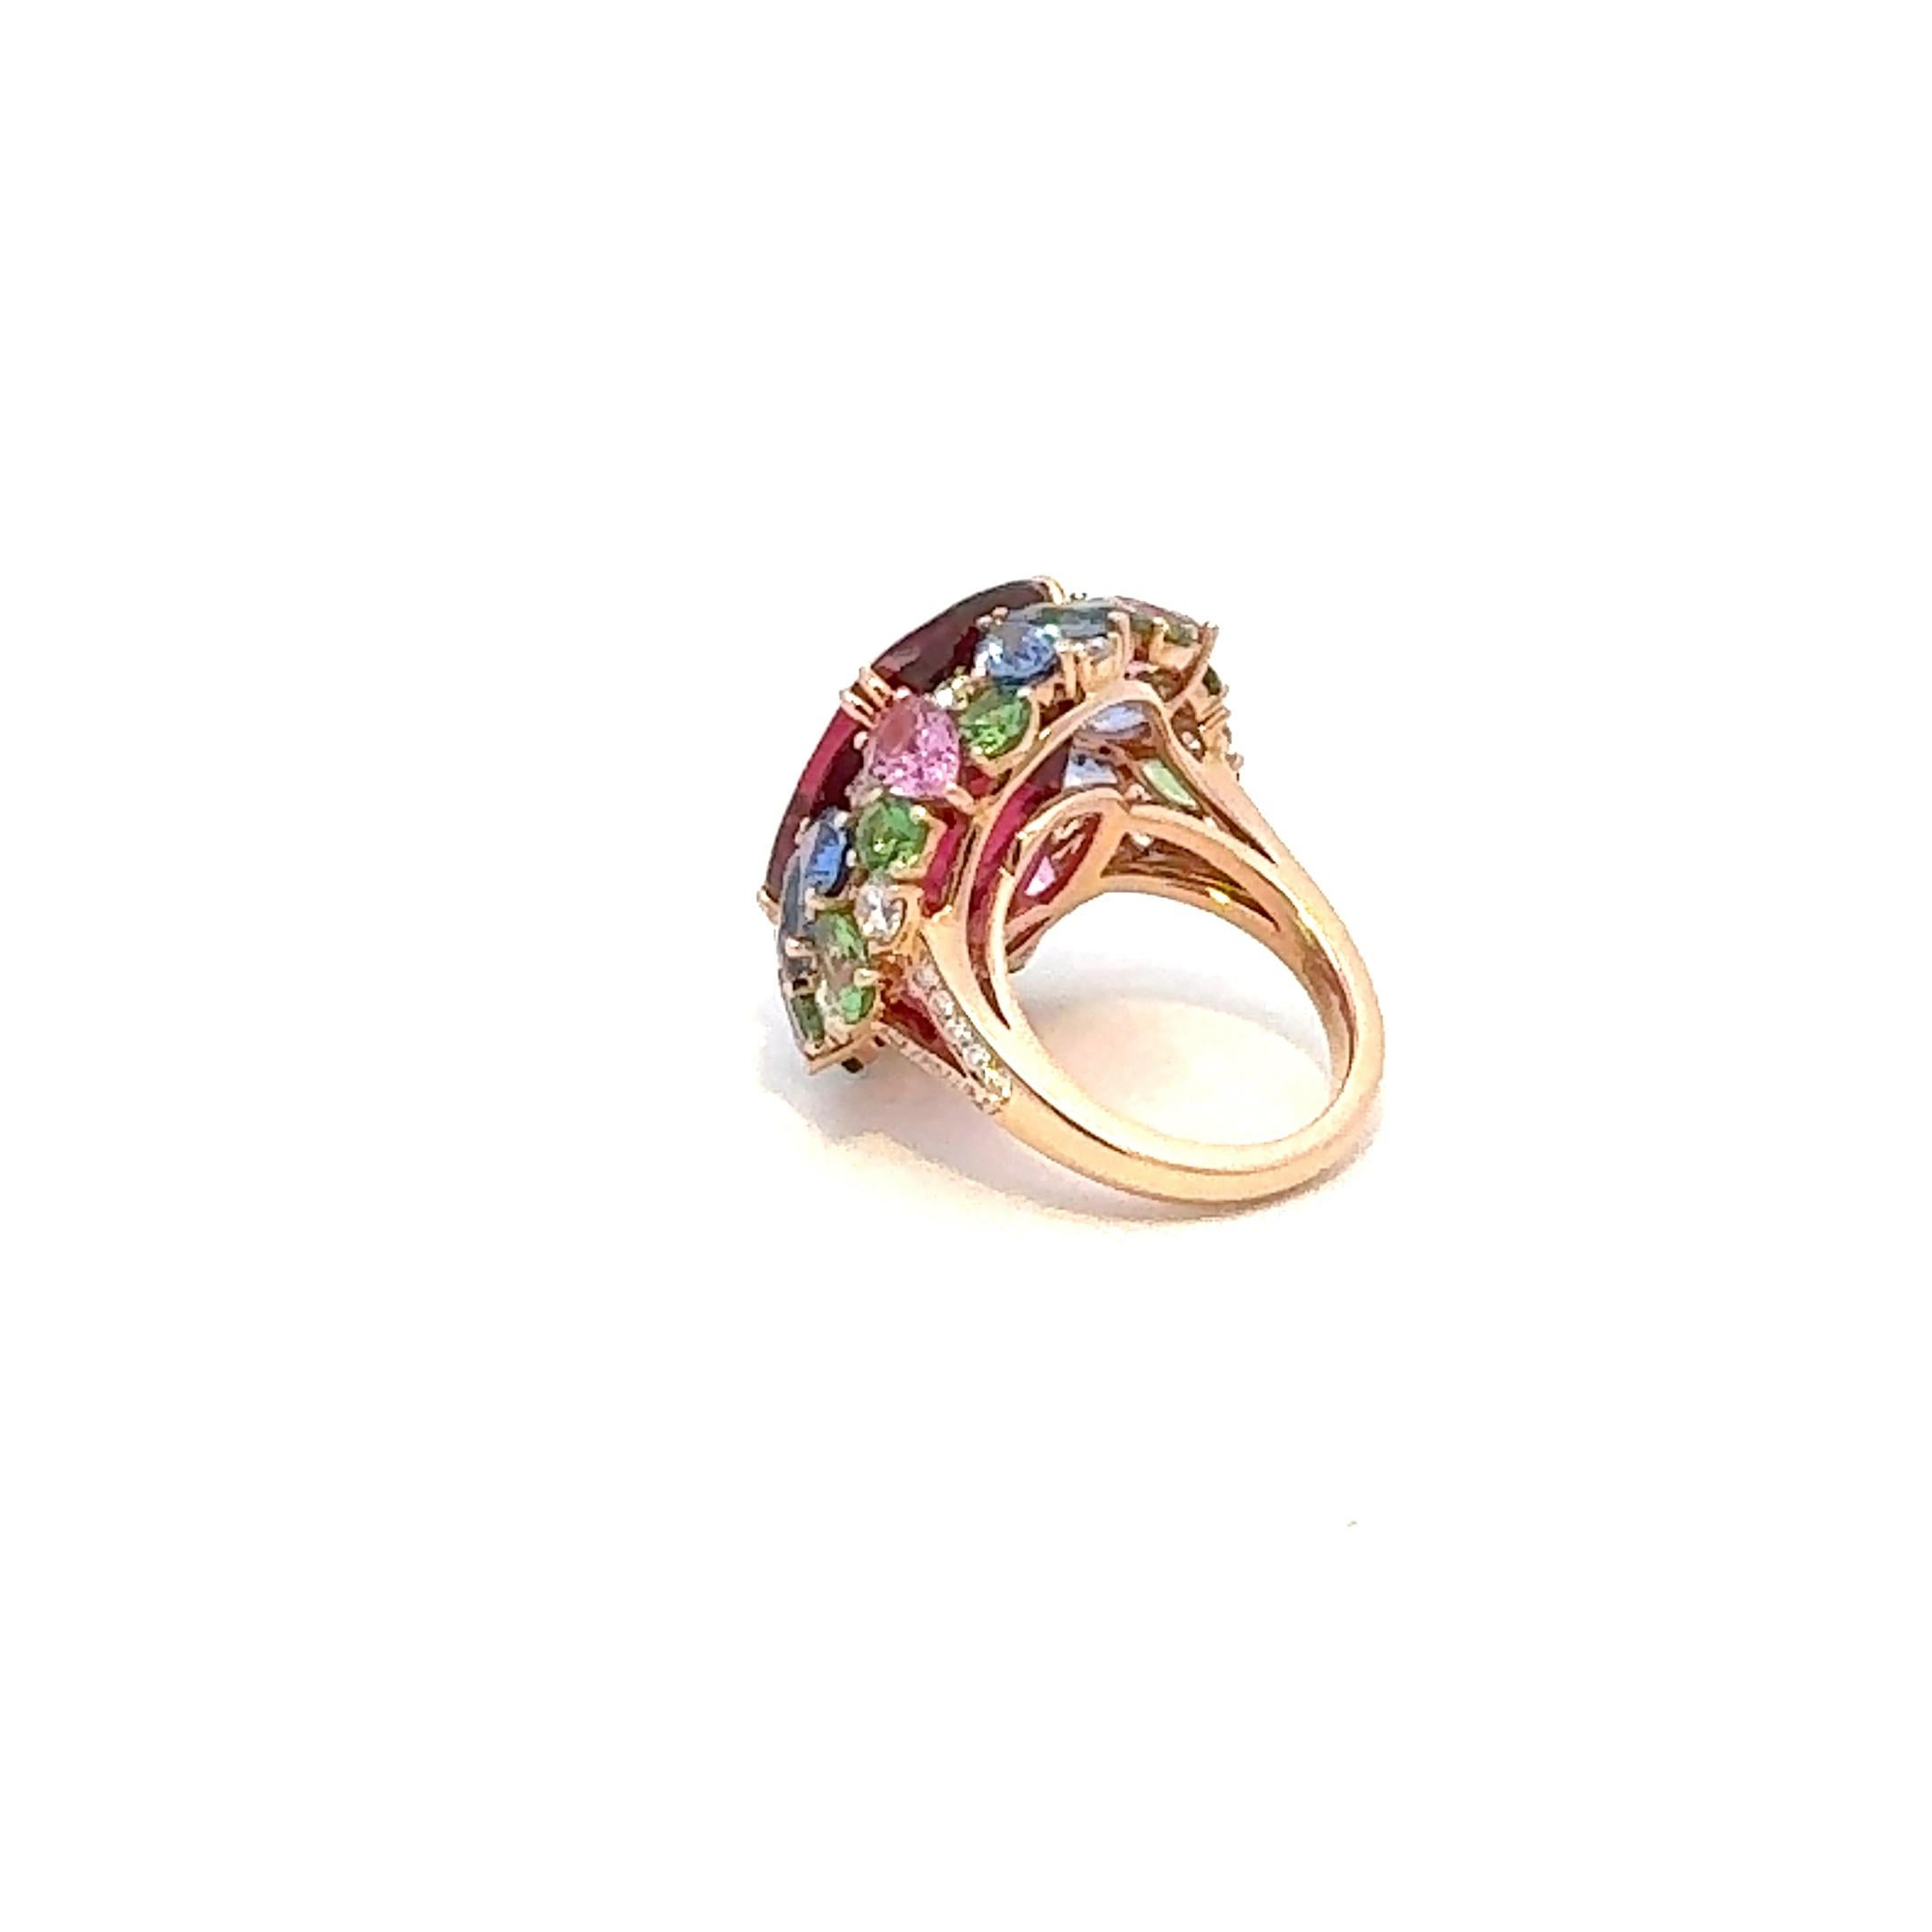 Ring

18K Yellow Gold

Diamonds 0.73 ct
Emeralds 1.74 ct
Pink sapphires 3.98 ct
Rubellite 12.99 ct

Weight 9,50 grams


It is our honour to create fine jewelry, and it’s for that reason that we choose to only work with high-quality, enduring